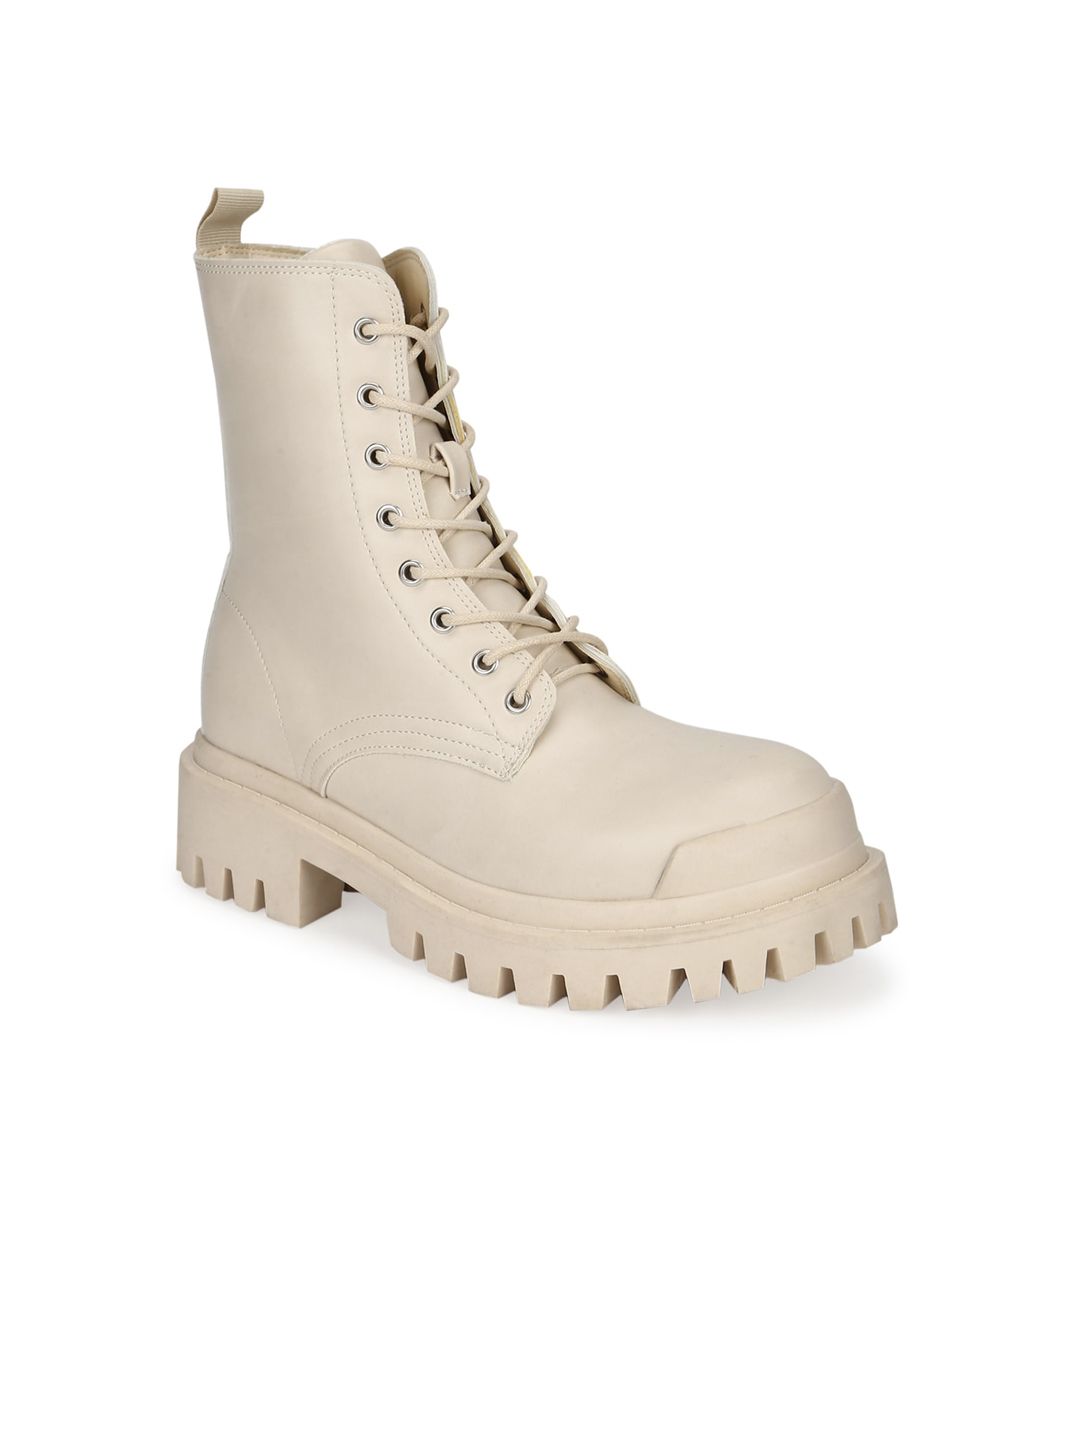 Truffle Collection Beige PU High-Top Platform Heeled Boots Price in India